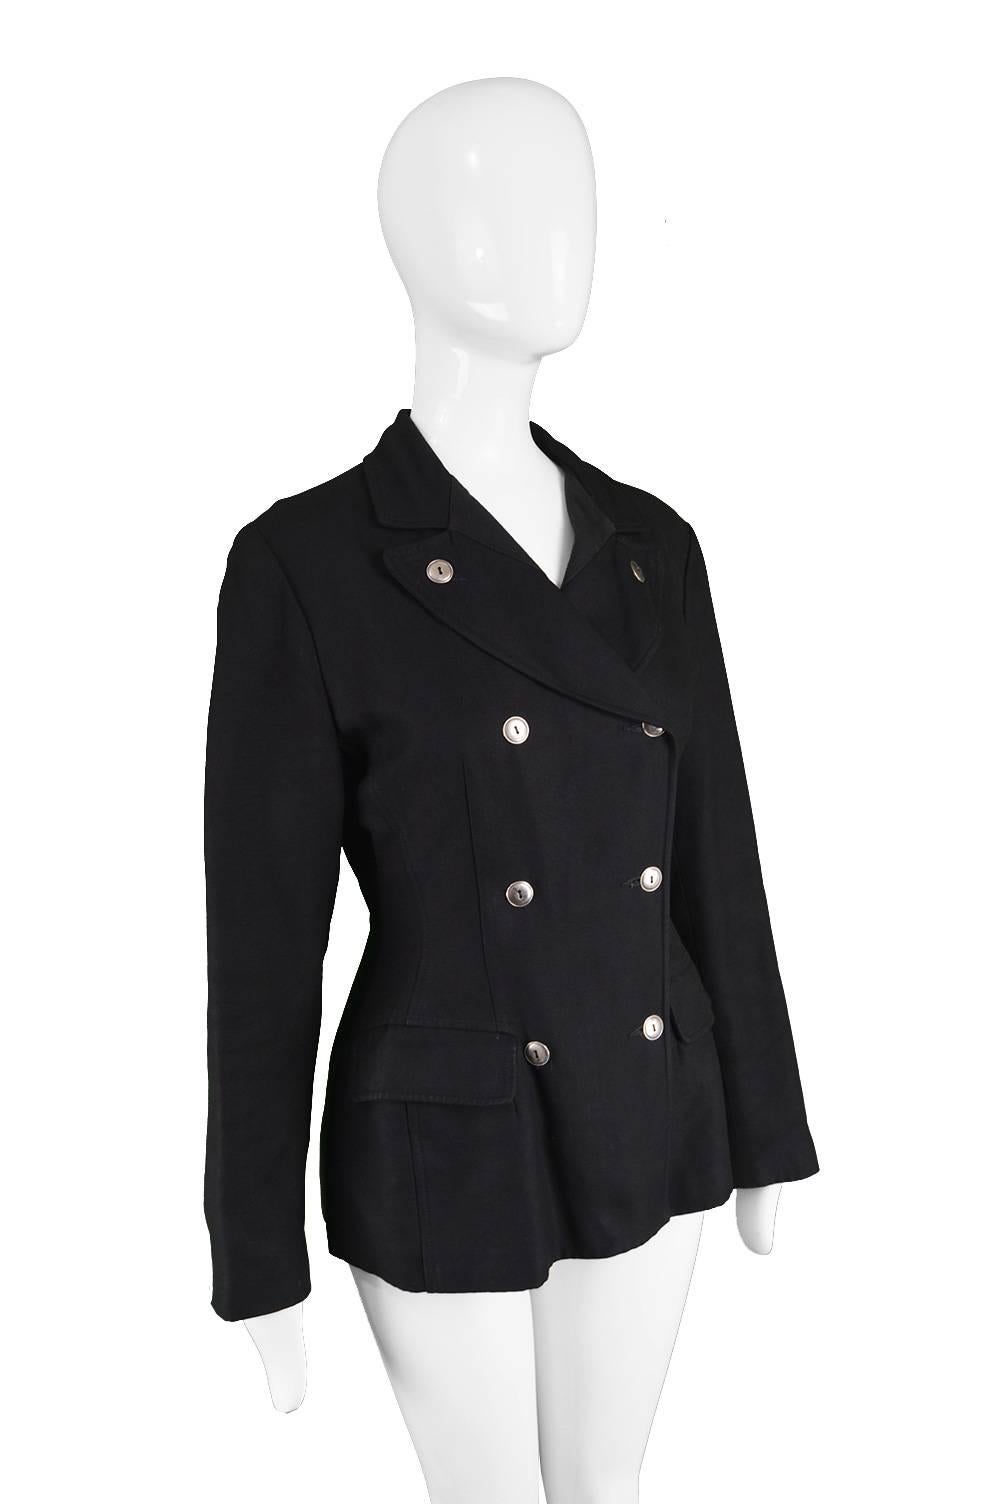 Jean Paul Gaultier Vintage 1980s Women's Black Double Breasted Blazer Jacket In Good Condition For Sale In Doncaster, South Yorkshire